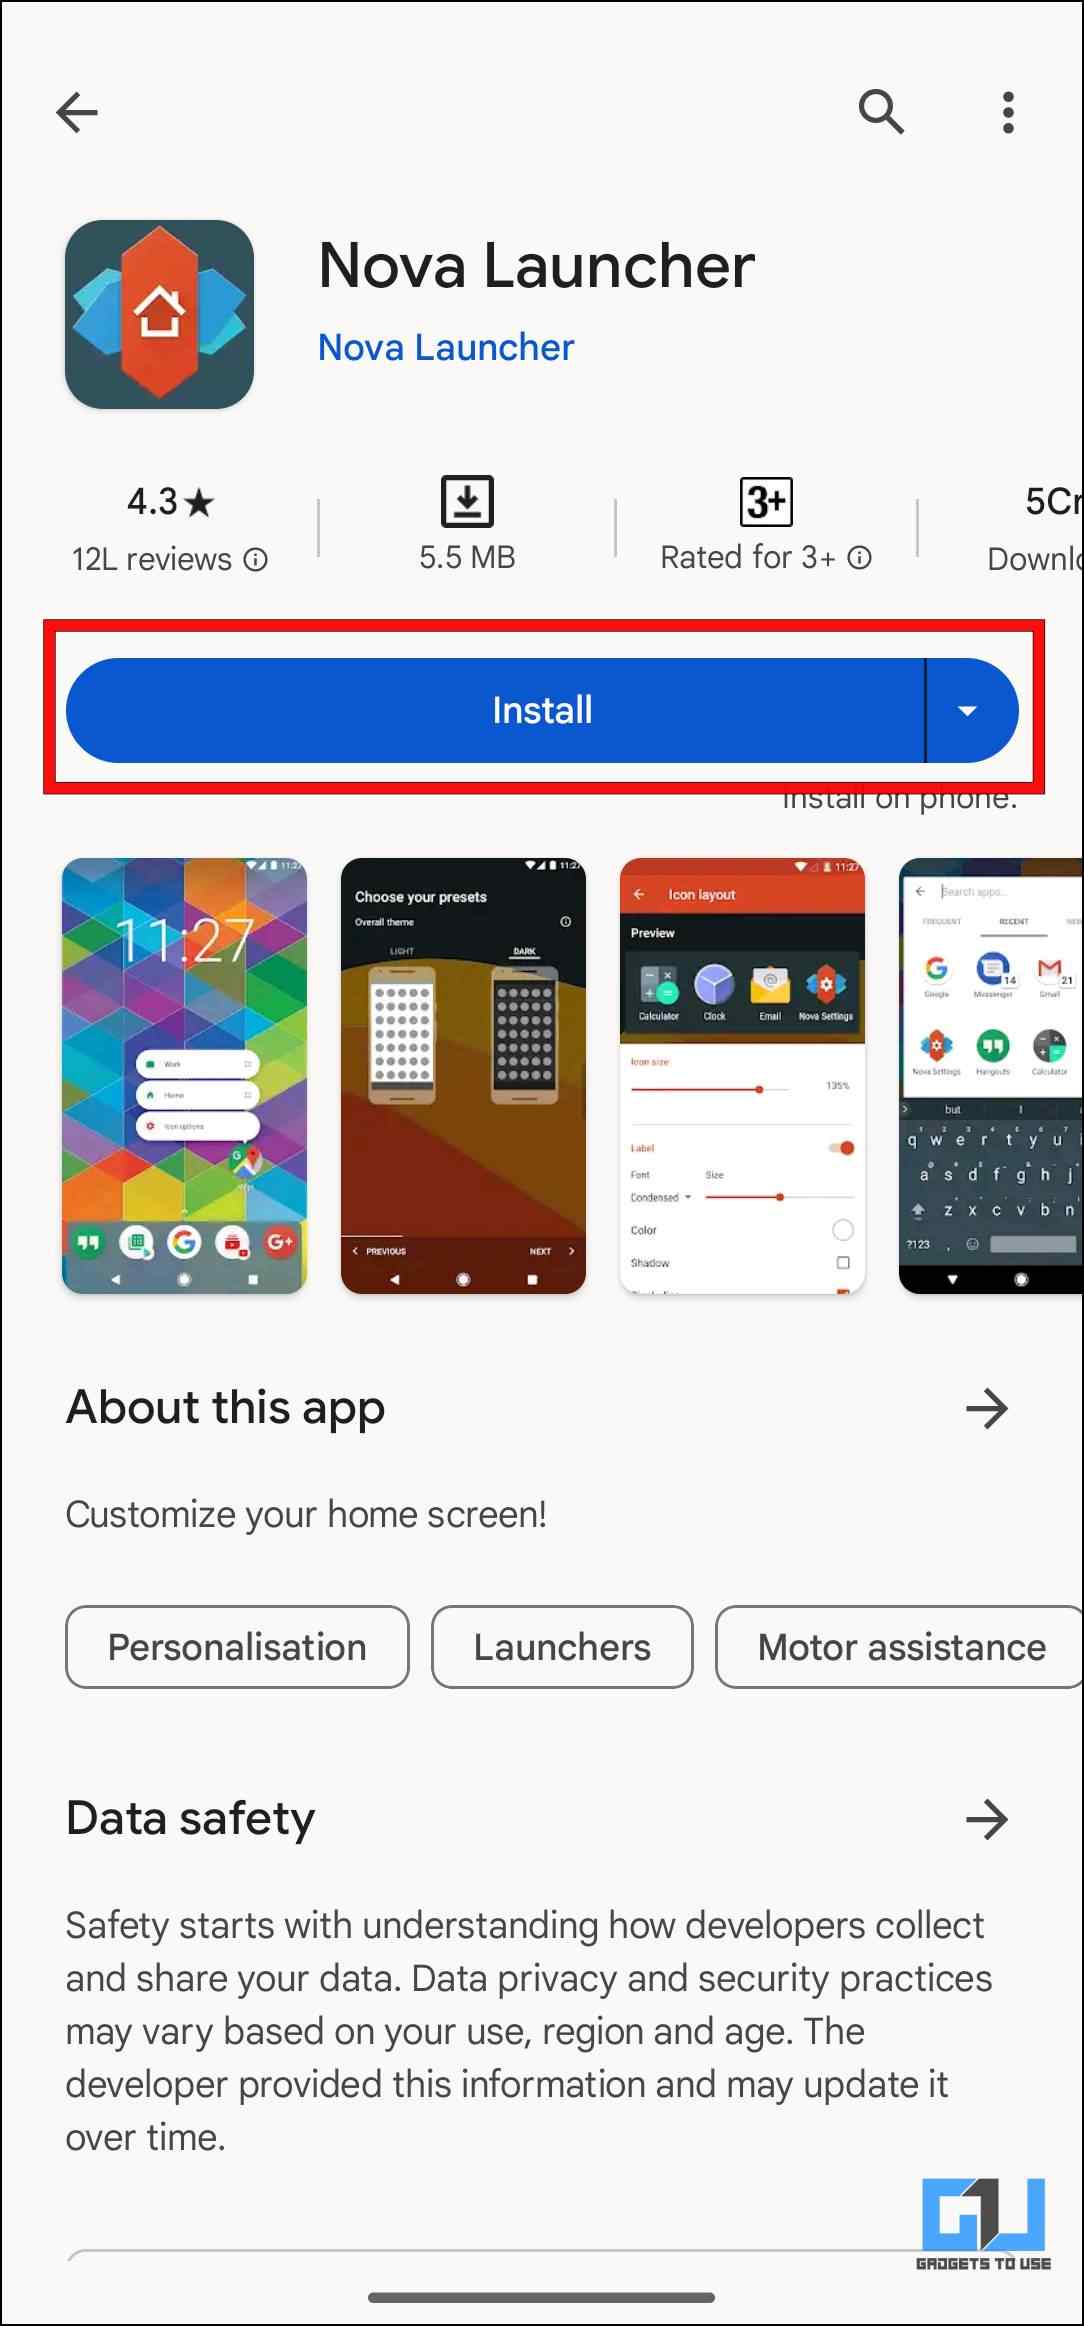 Download the Nova Launcher App from Google Play Store